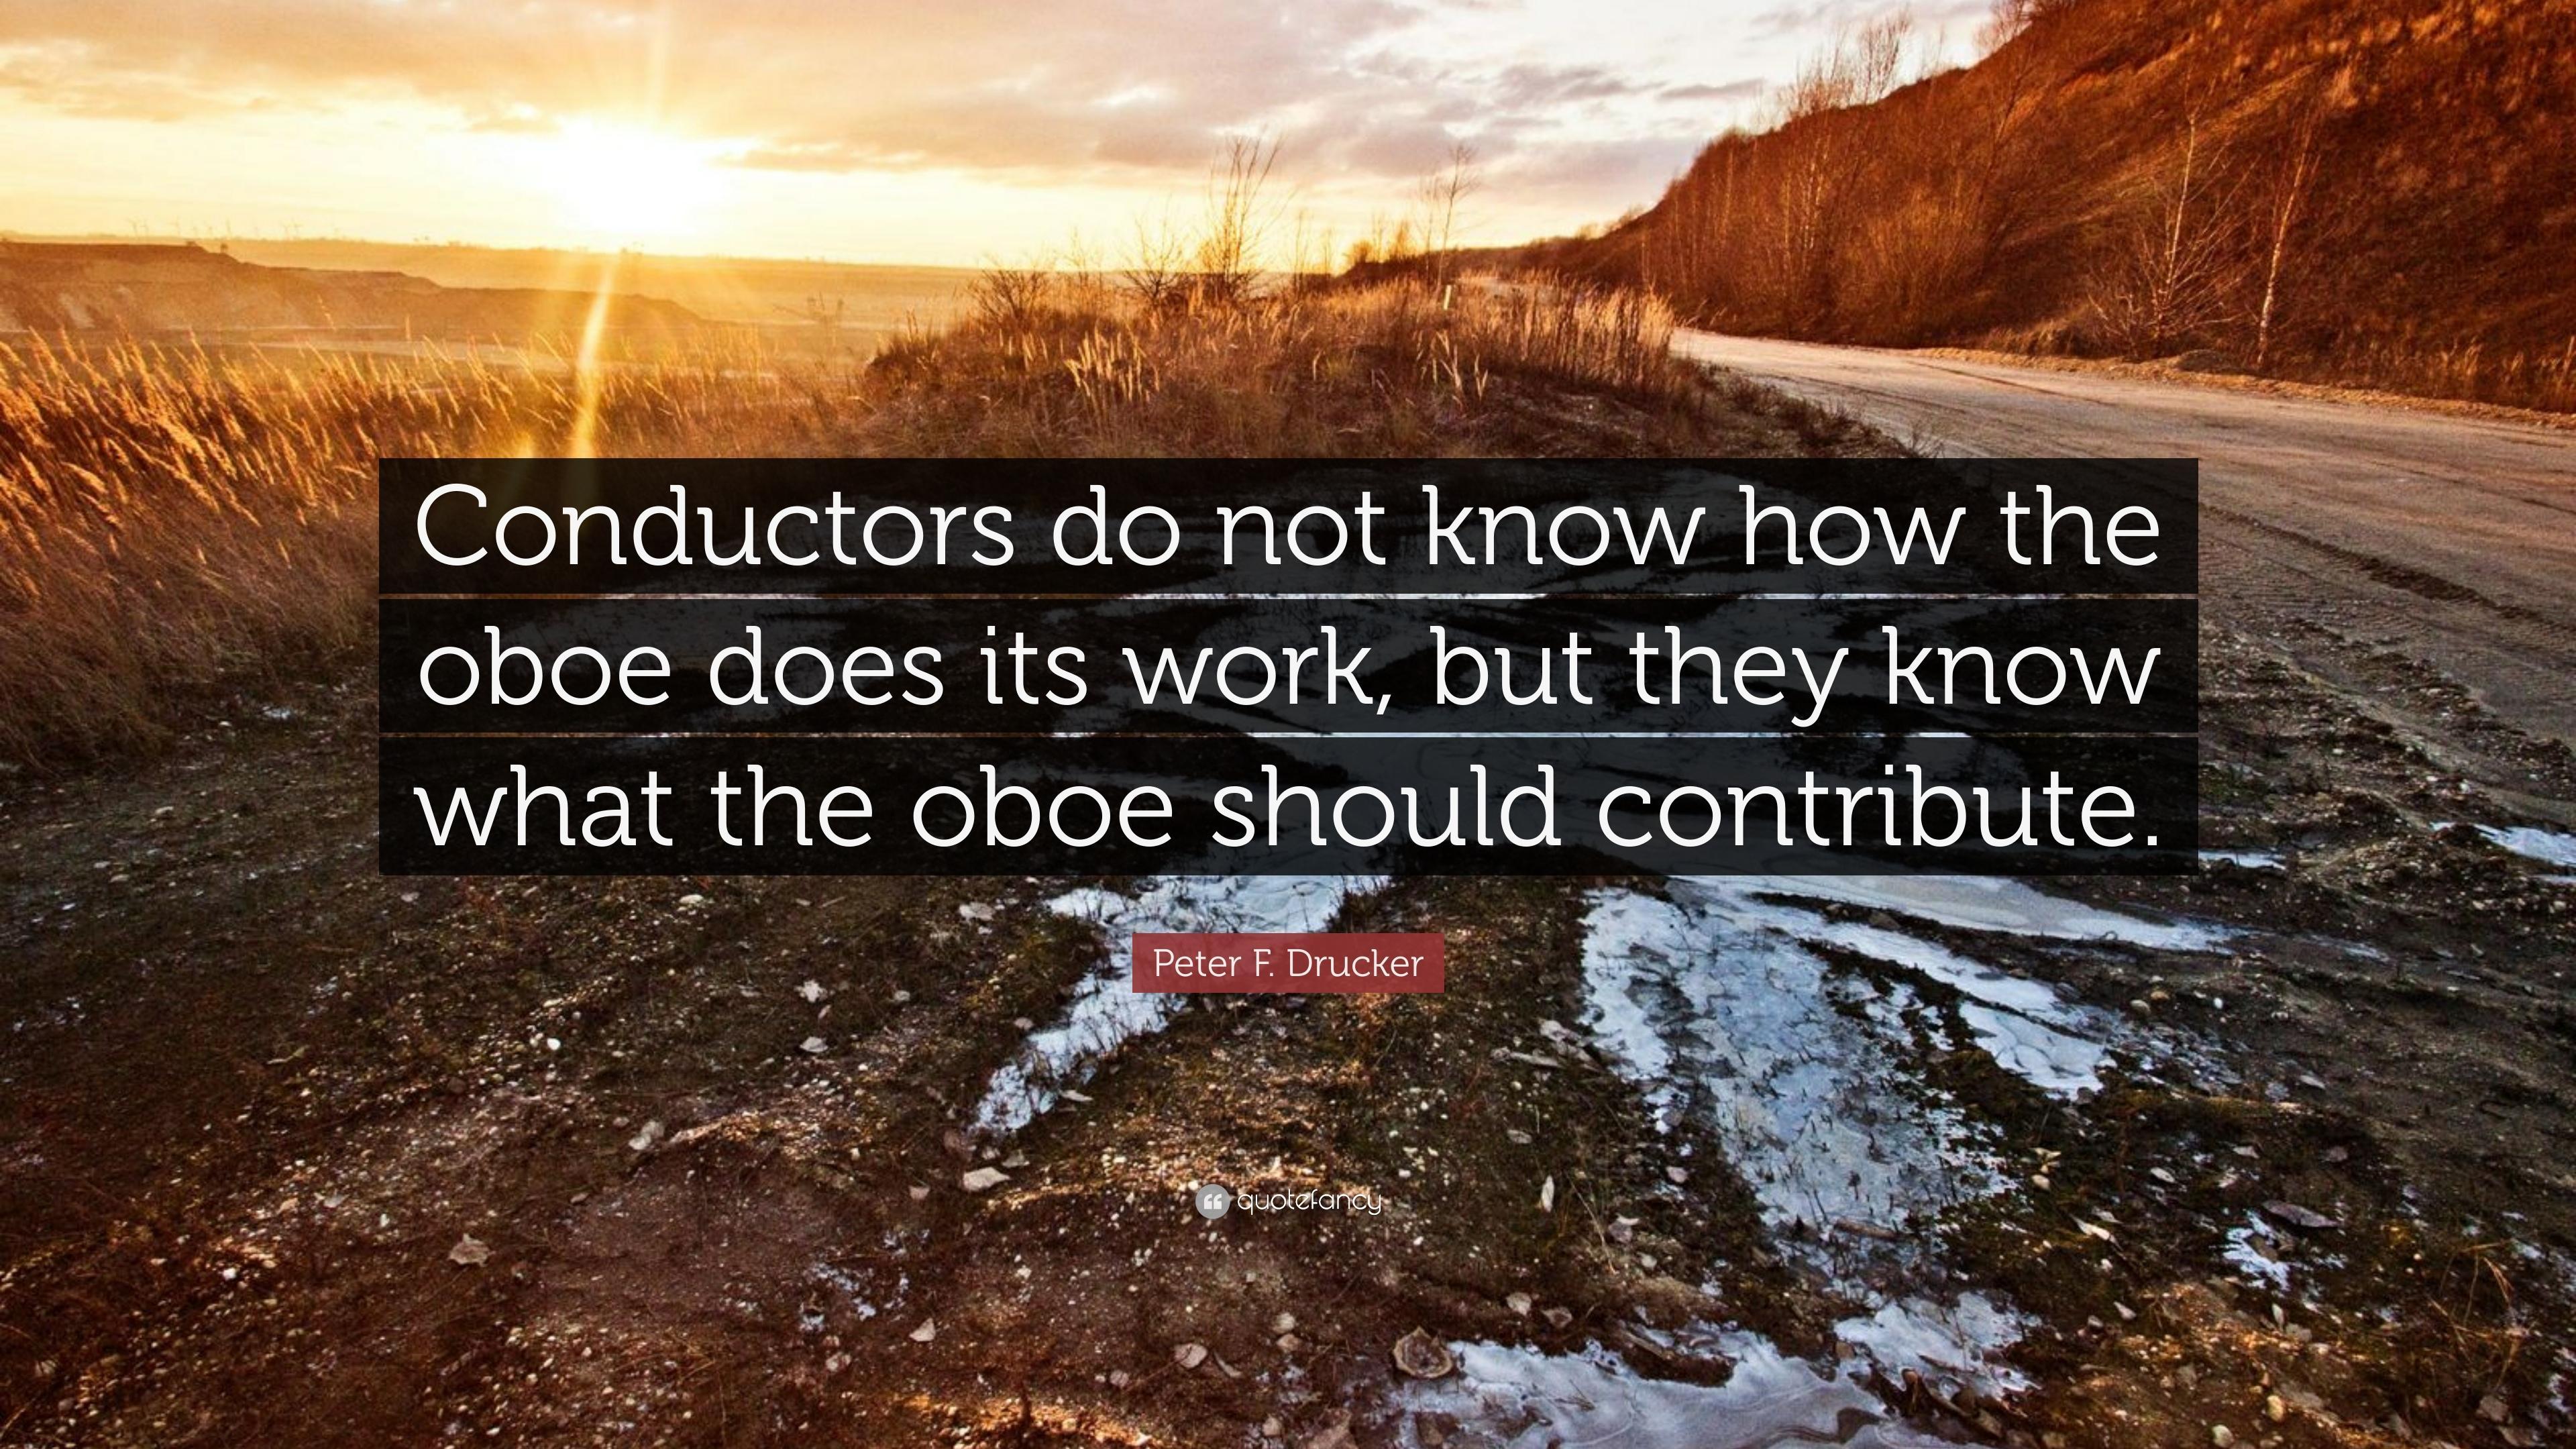 Peter F. Drucker Quote: “Conductors do not know how the oboe does